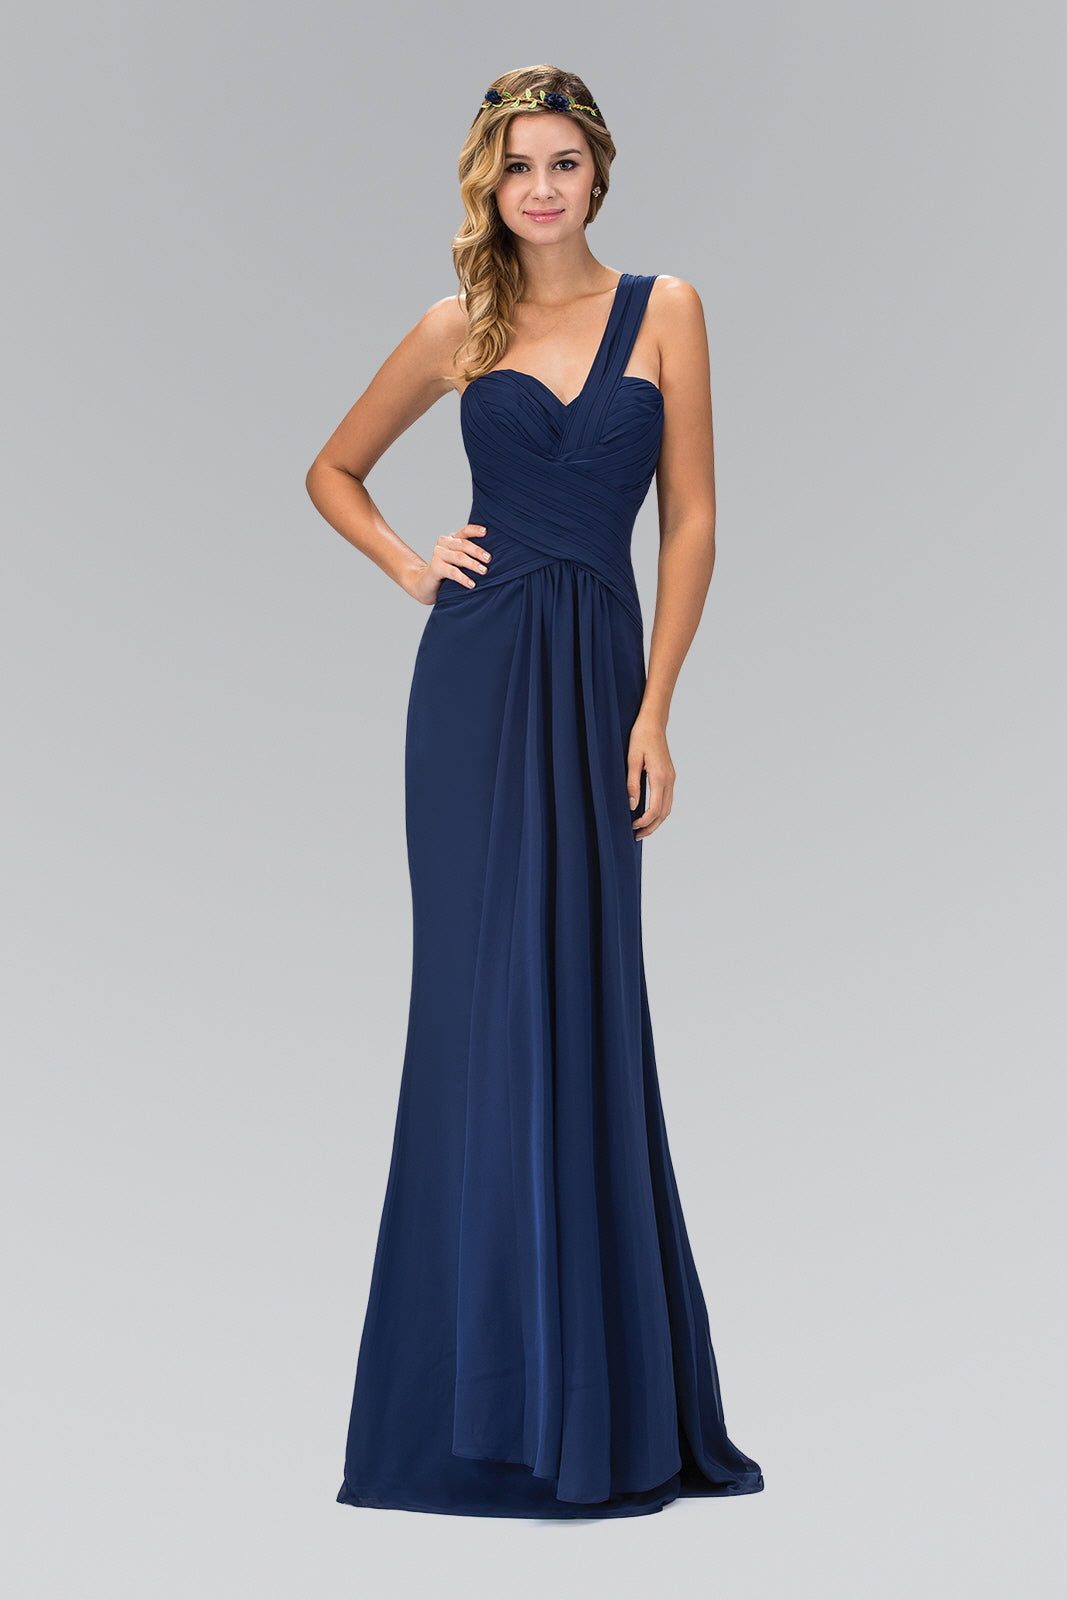 GLS COLLECTIVE - GL1390 - Champagne Size S or Navy Size L One Shoulder Ruched Long Dress with Sweetheart Neckline